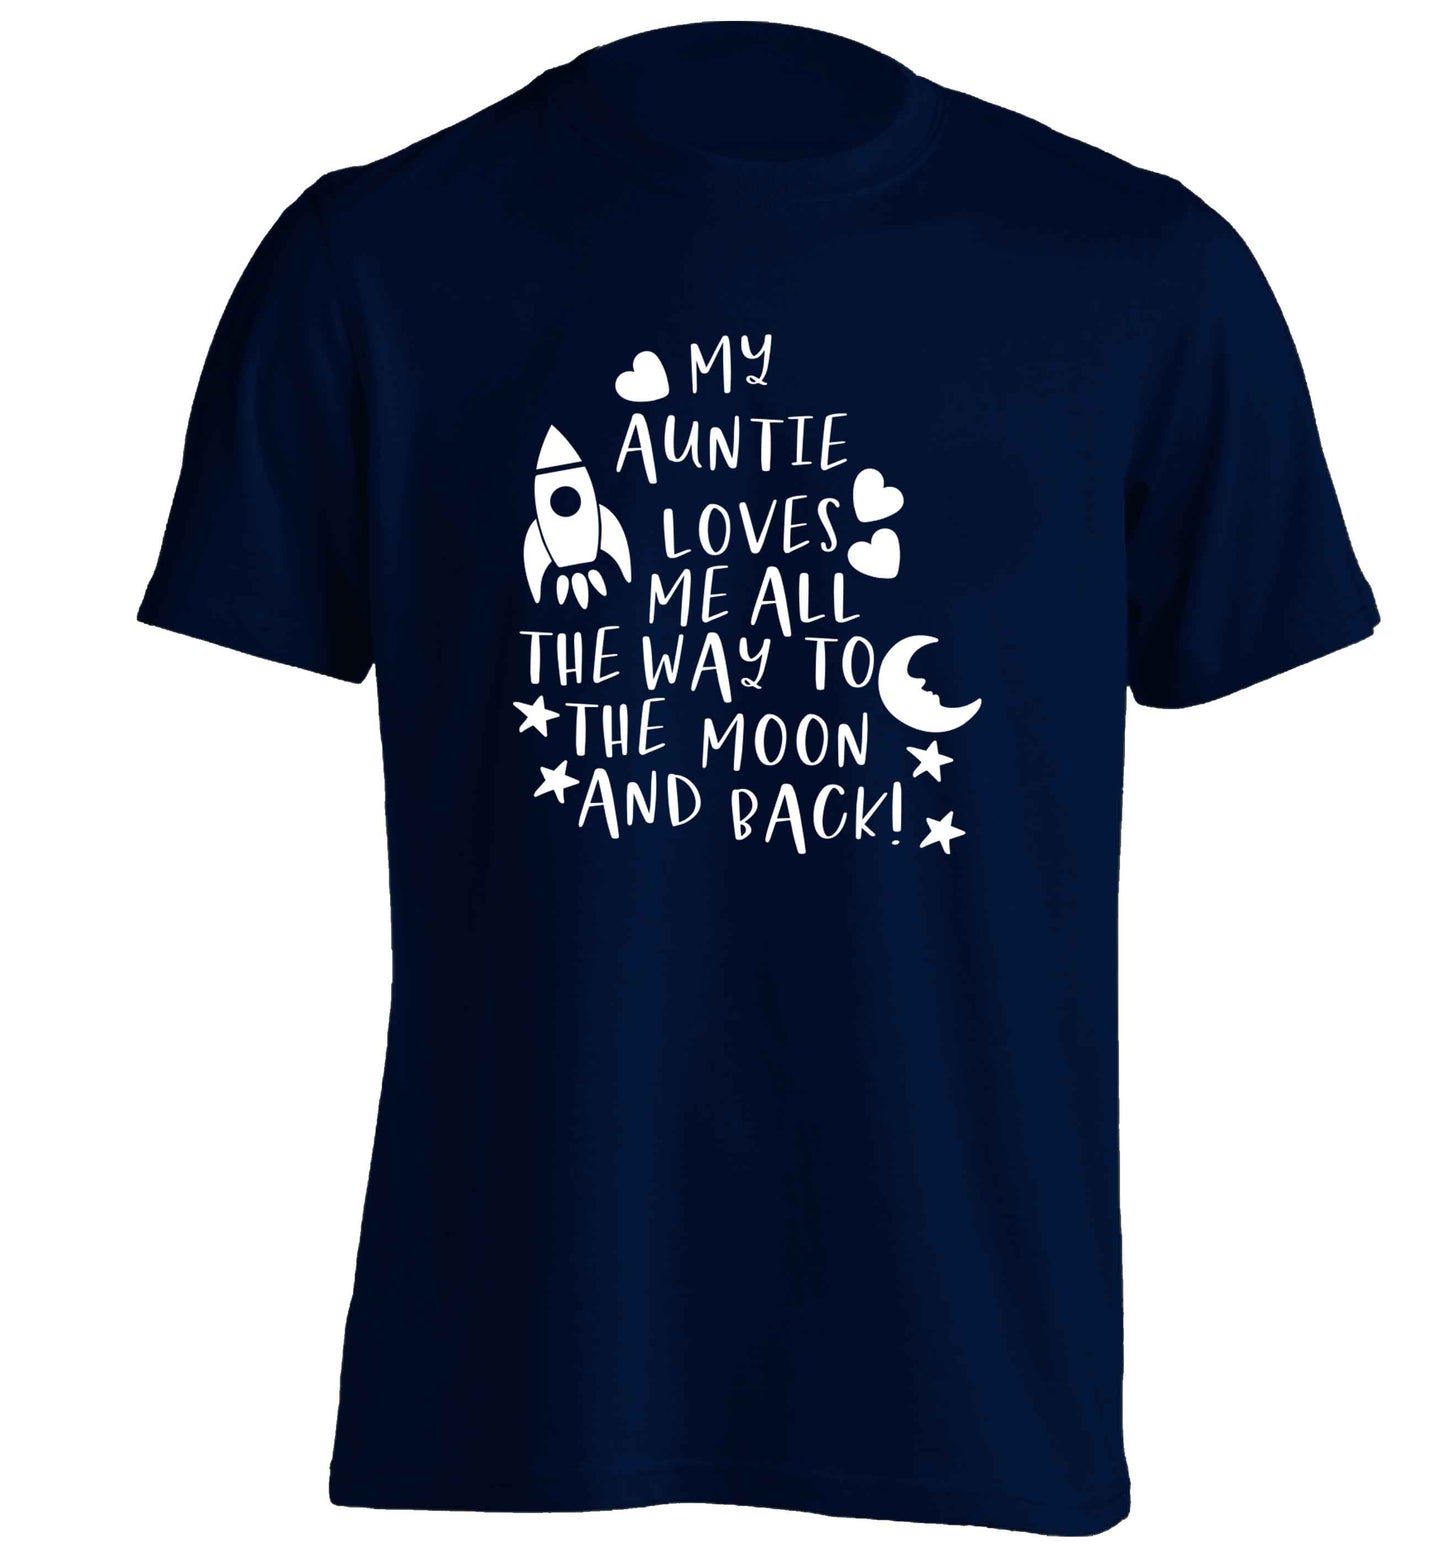 My auntie loves me all the way to the moon and back adults unisex navy Tshirt 2XL